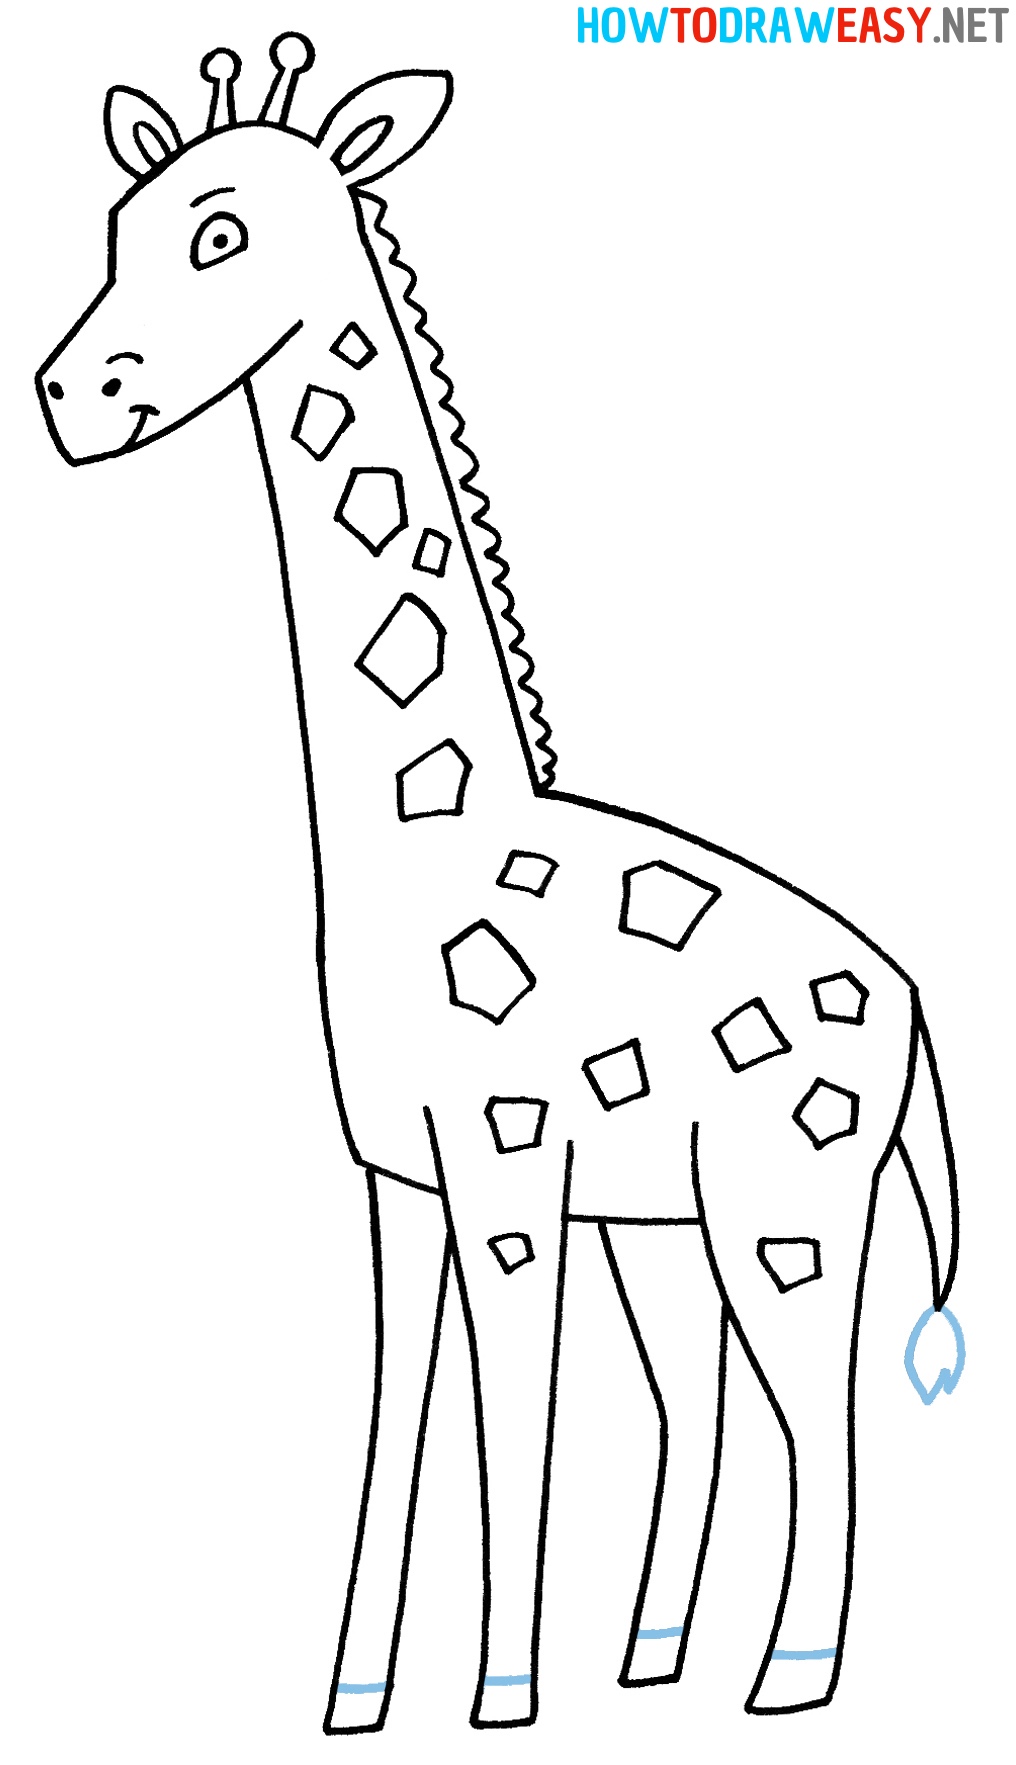 How to Draw a Giraffe Easy